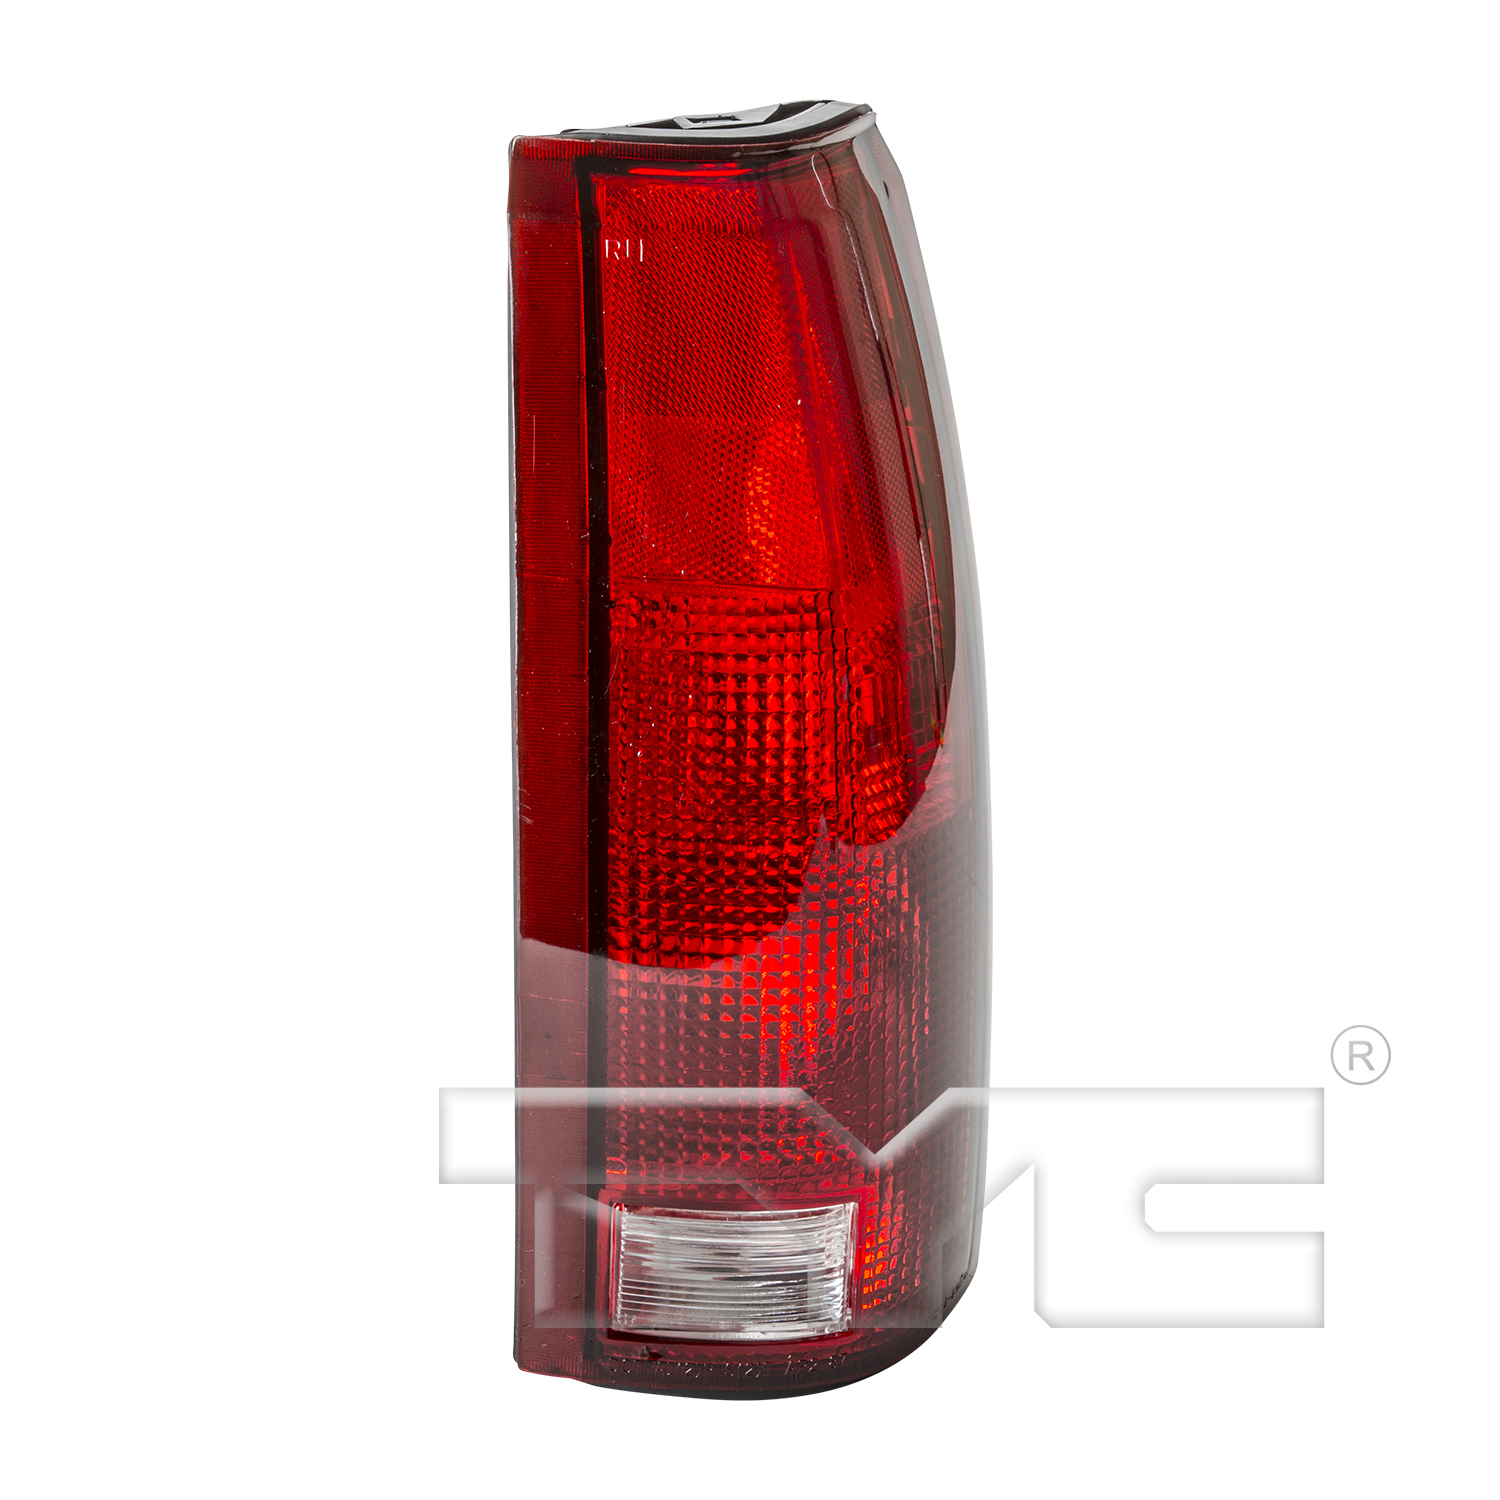 Aftermarket TAILLIGHTS for CHEVROLET - TAHOE, TAHOE,95-00,RT Taillamp lens